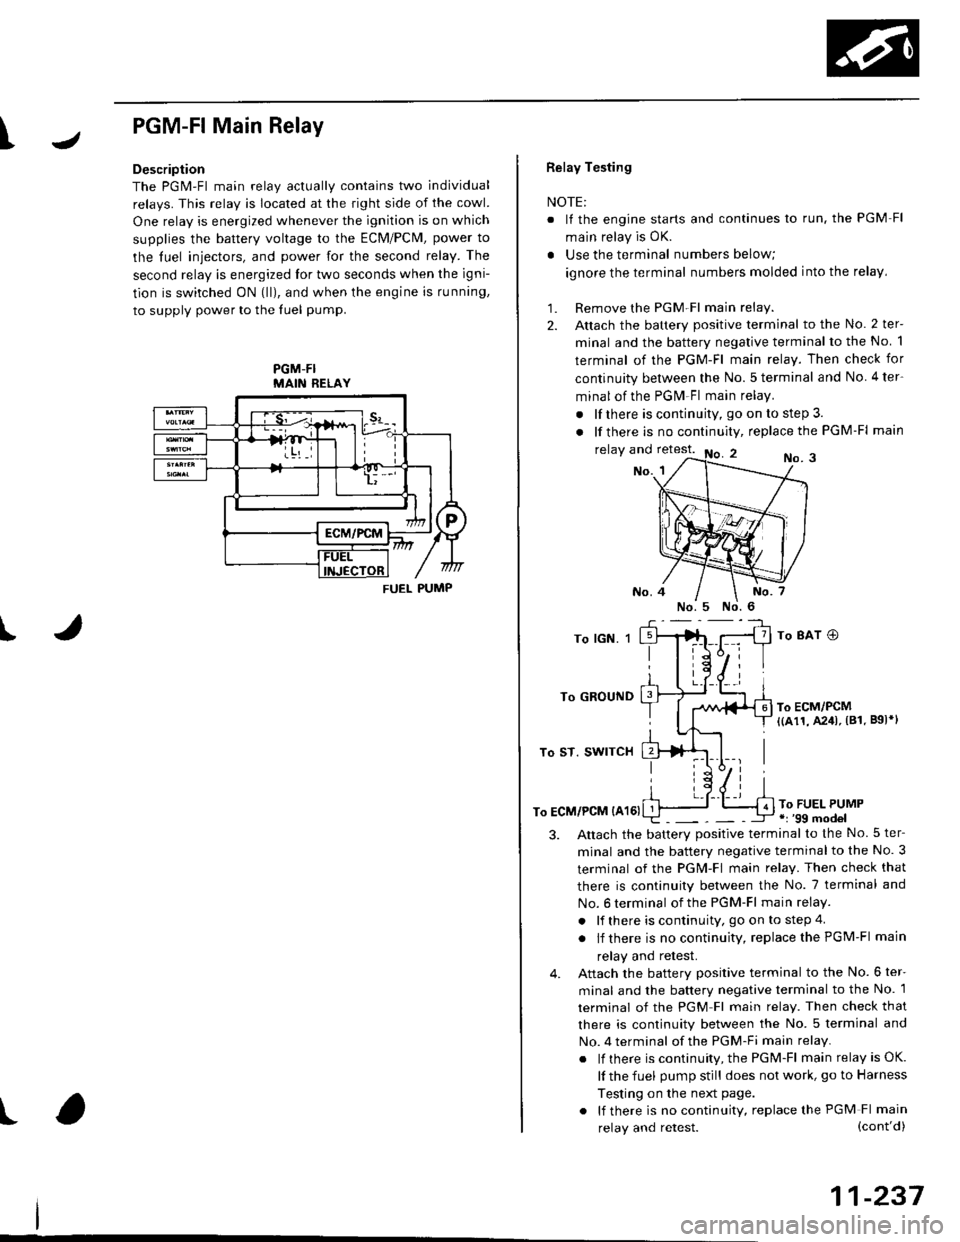 HONDA CIVIC 1999 6.G Service Manual I
PGM-FlMain Relay
Description
The PGM-Fl main relav actuallv contains two individual
relays. This relay is located at the right side of the cowl.
One relay is energized whenever the ignition is on wh